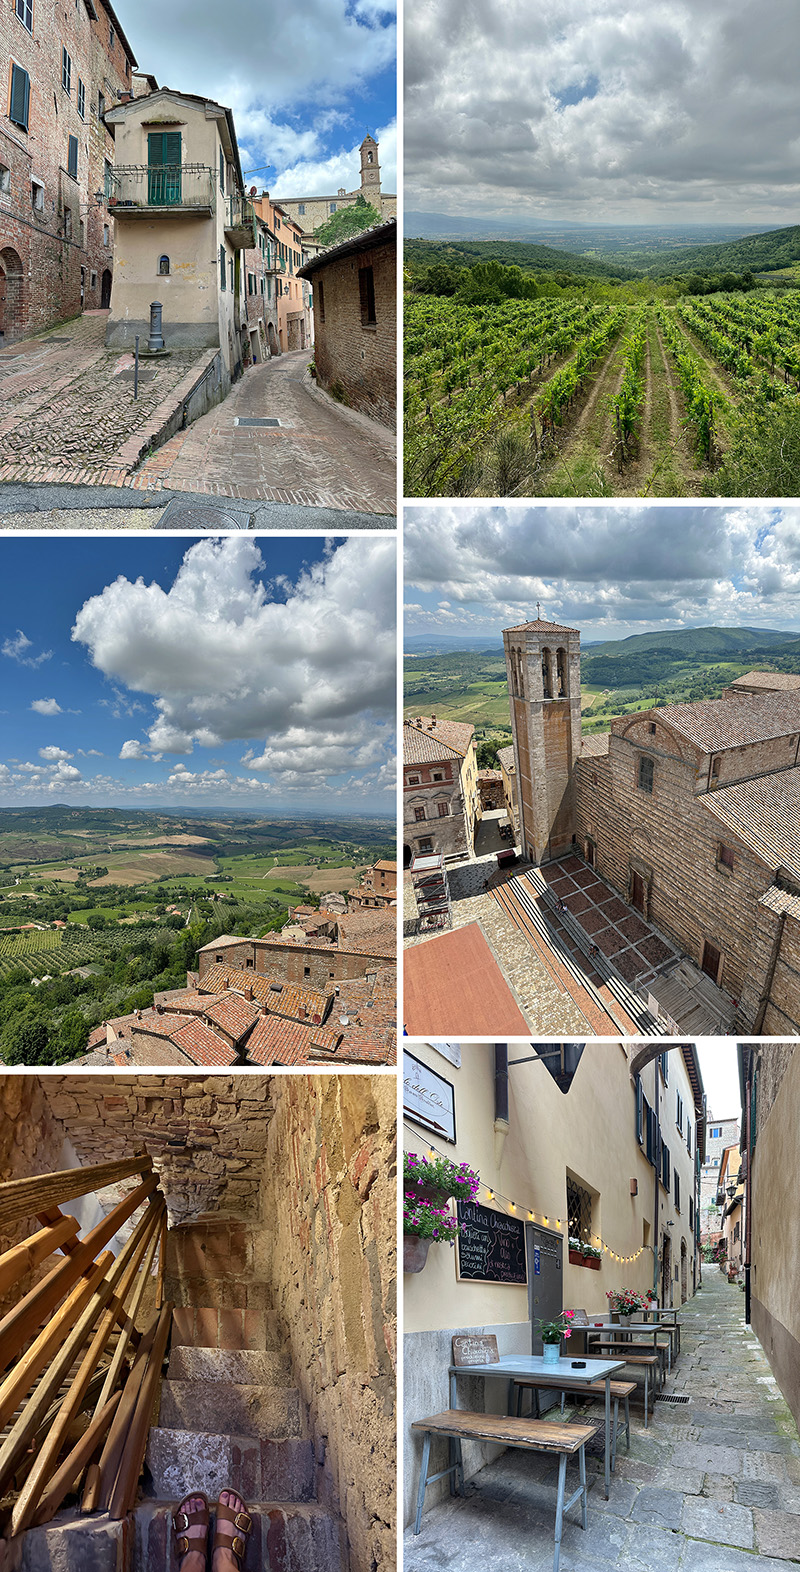 Montepulciano, Italy with Art Bar and family